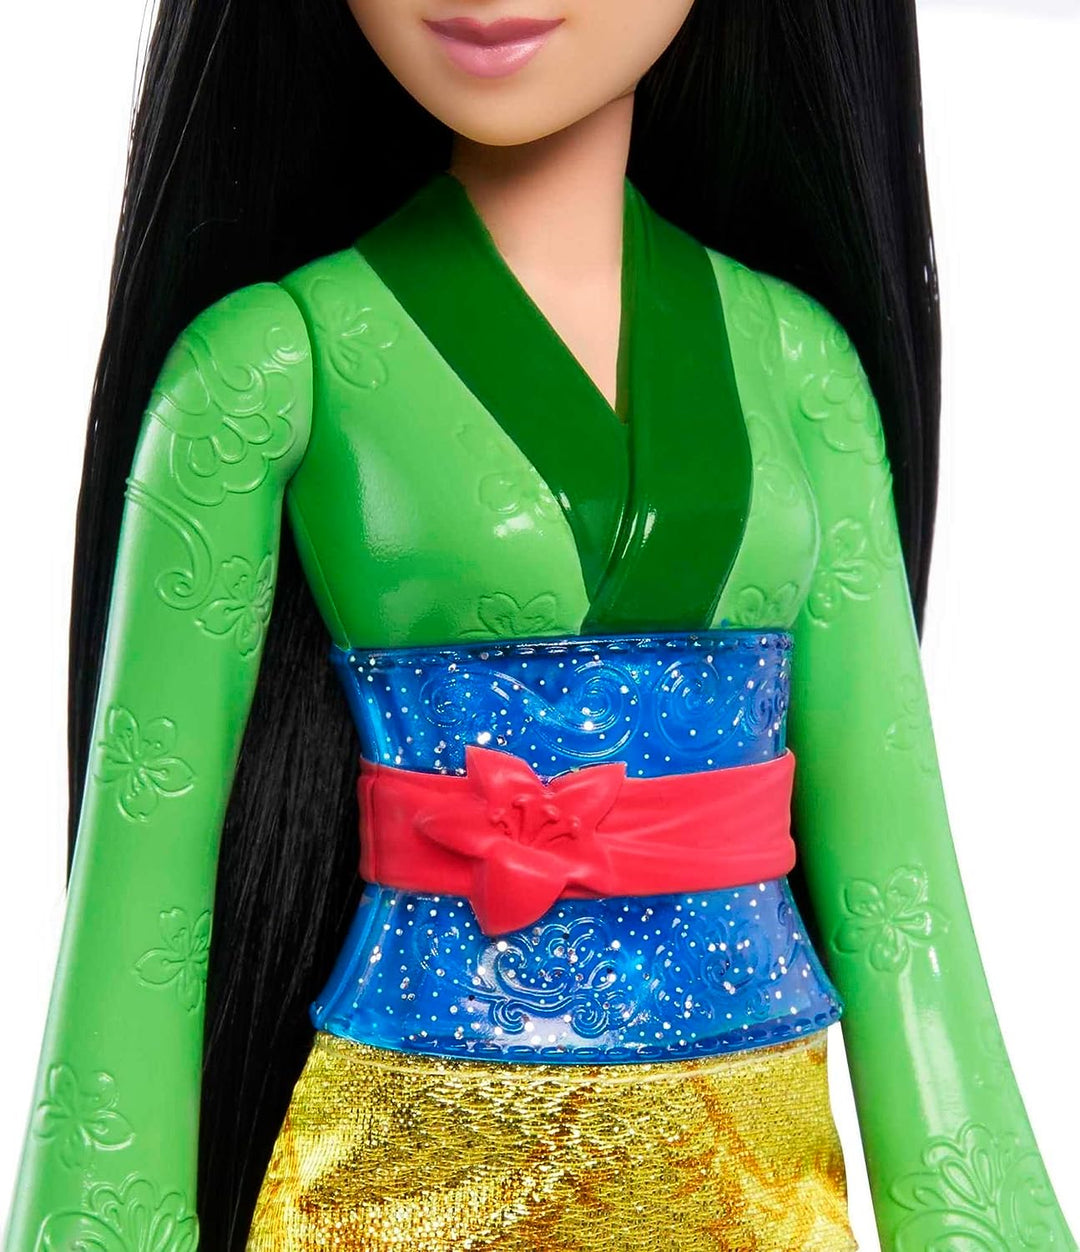 Disney Princess Toys, Mulan Posable Fashion Doll with Sparkling Clothing and Accessories